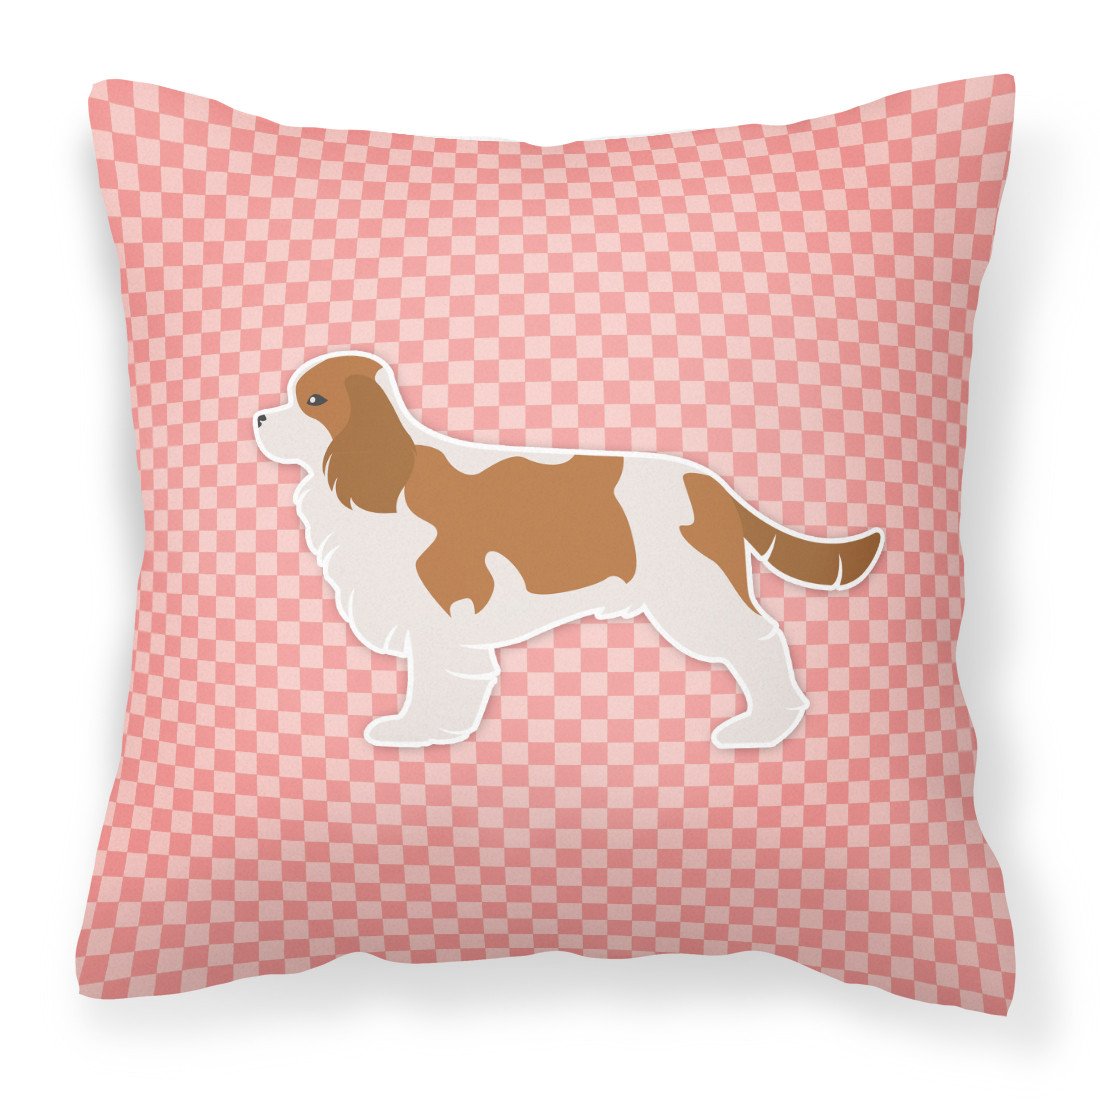 Cavalier King Charles Spaniel Checkerboard Pink Fabric Decorative Pillow BB3649PW1818 by Caroline's Treasures